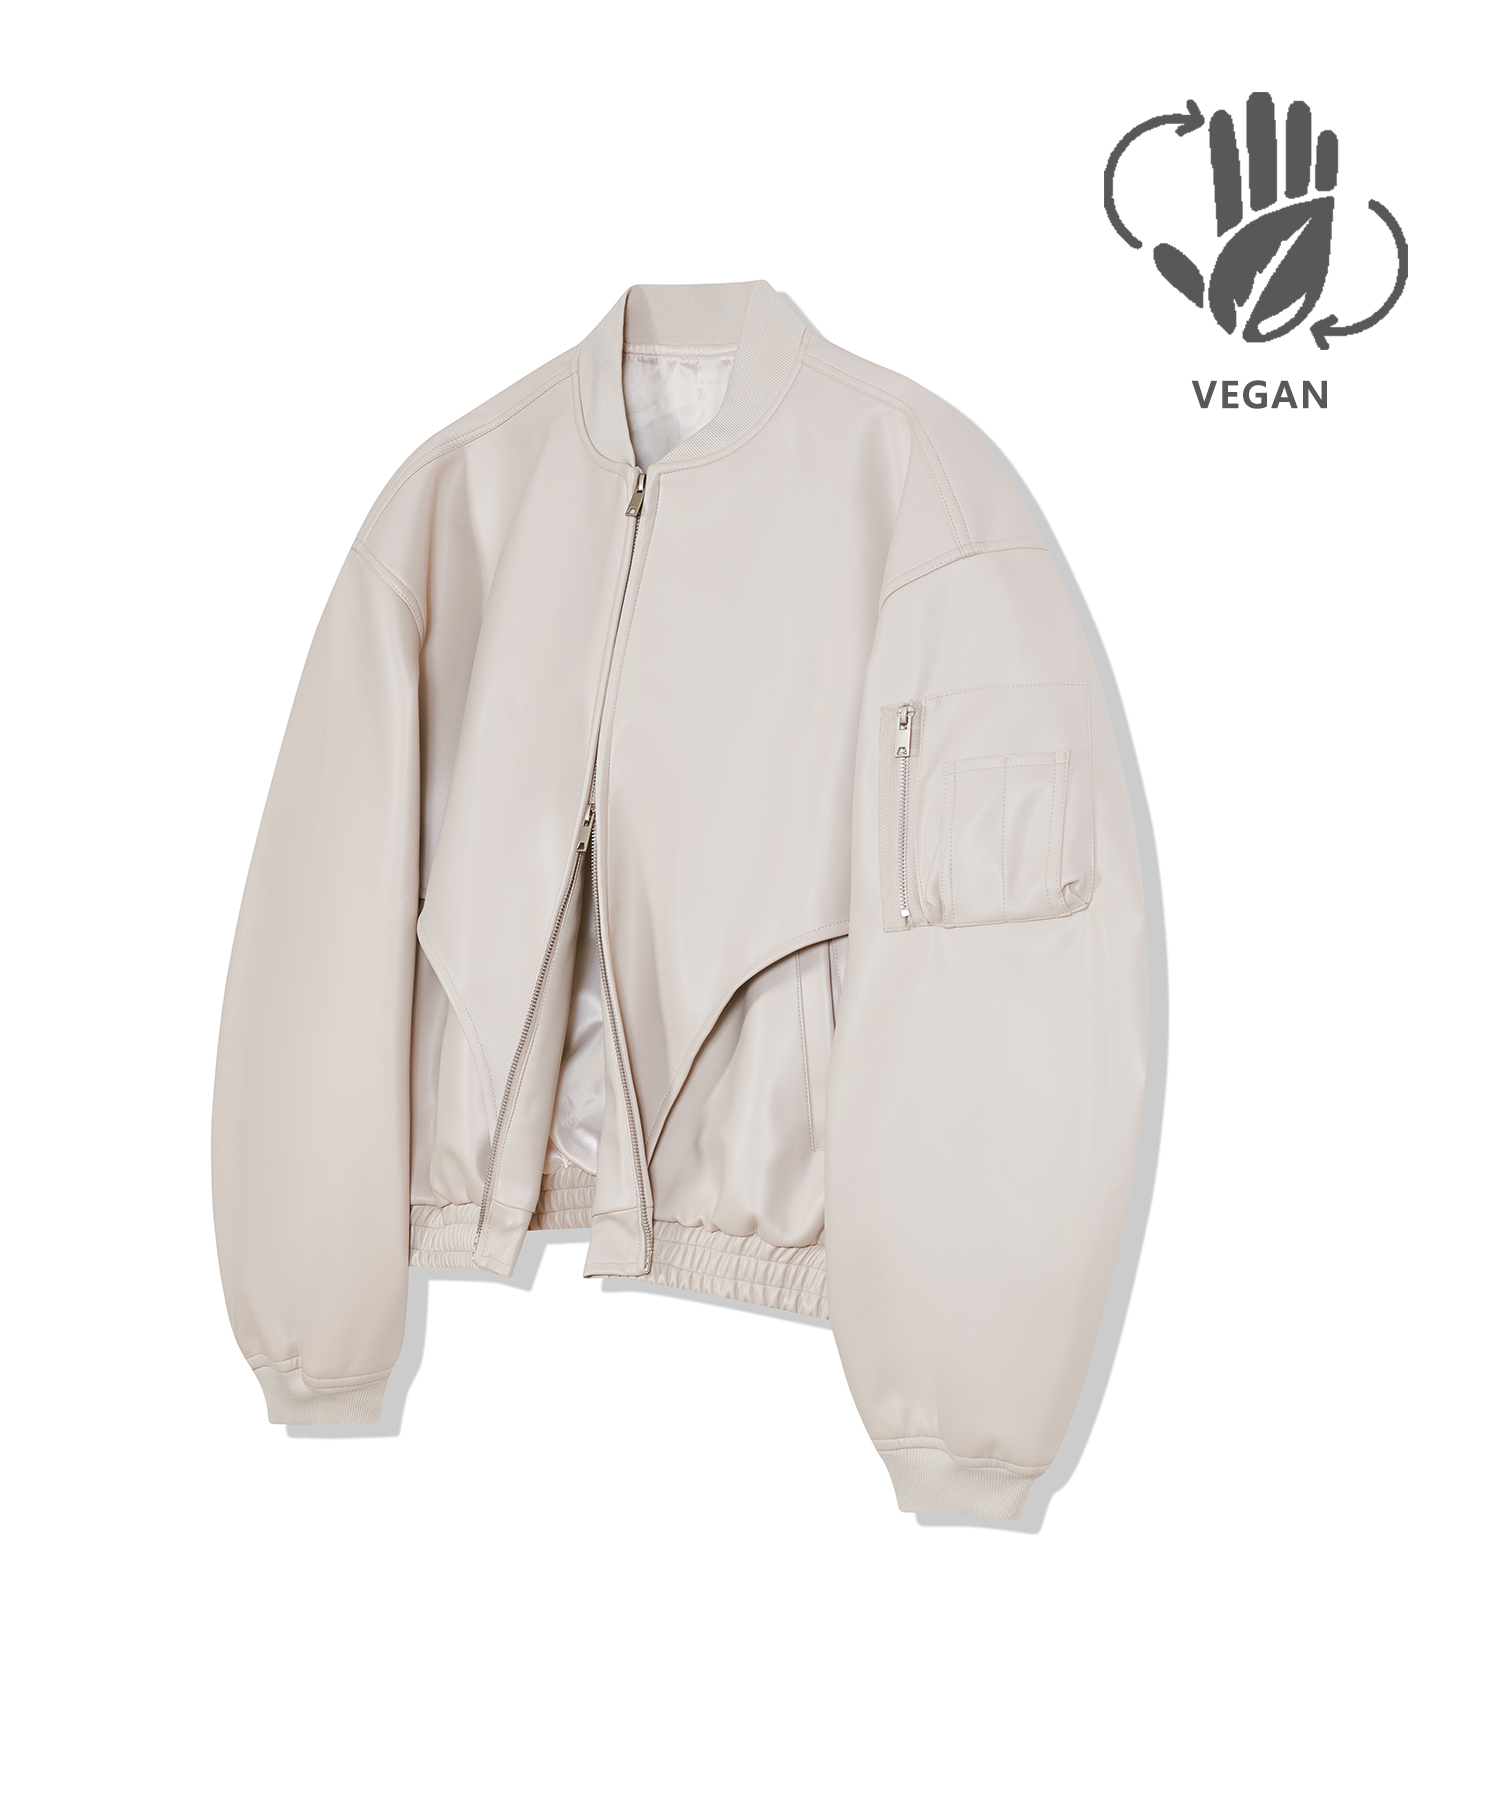 87-STAN026 [Vegan Leather] Curved Layer Bomber Leather Jacket Ivory